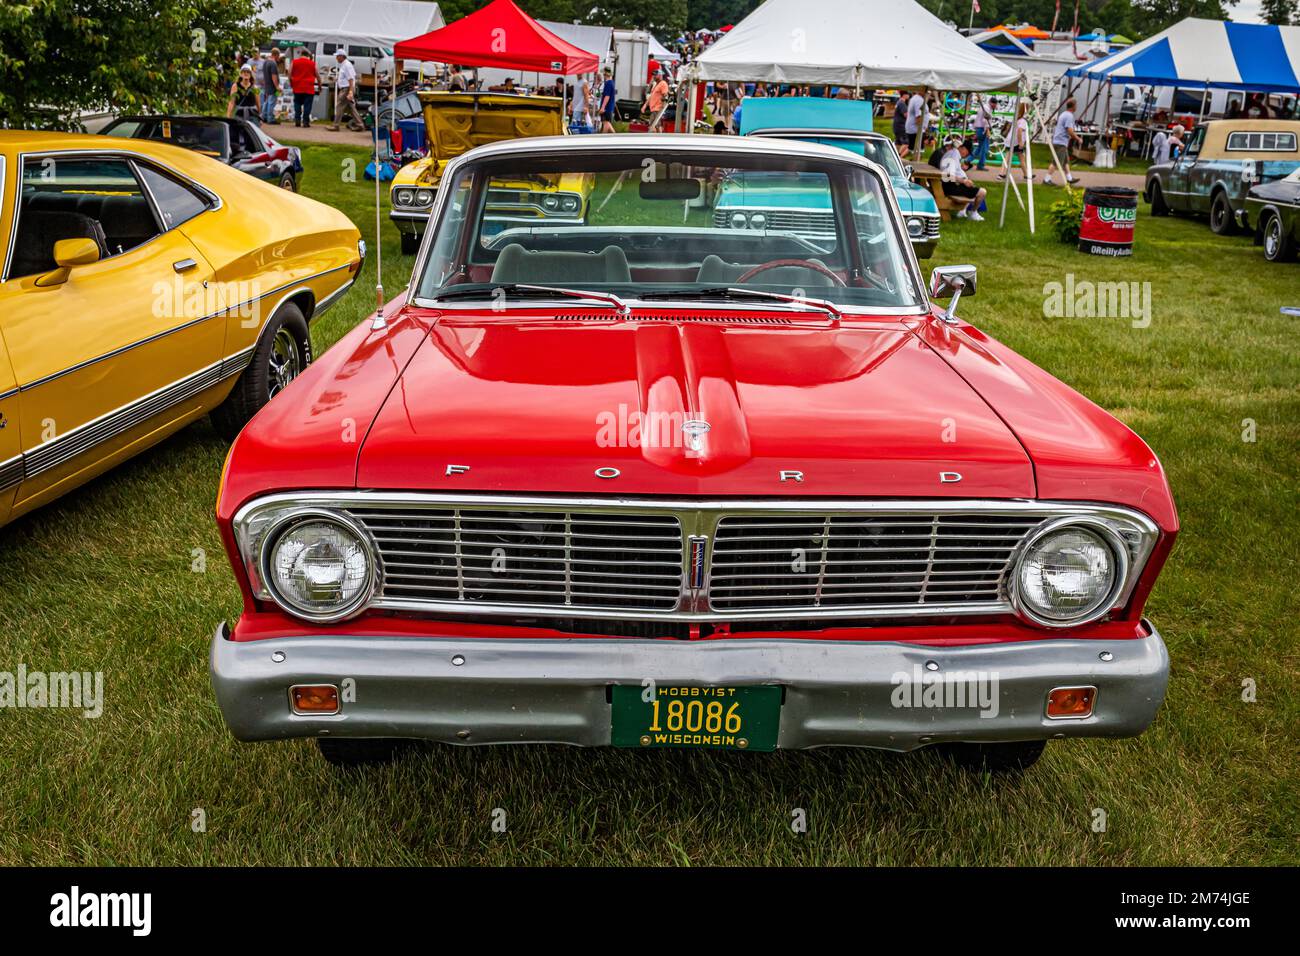 Iola, WI - July 07, 2022: High perspective front view of a 1965 Ford Falcon Ranchero Pickup at a local car show. Stock Photo